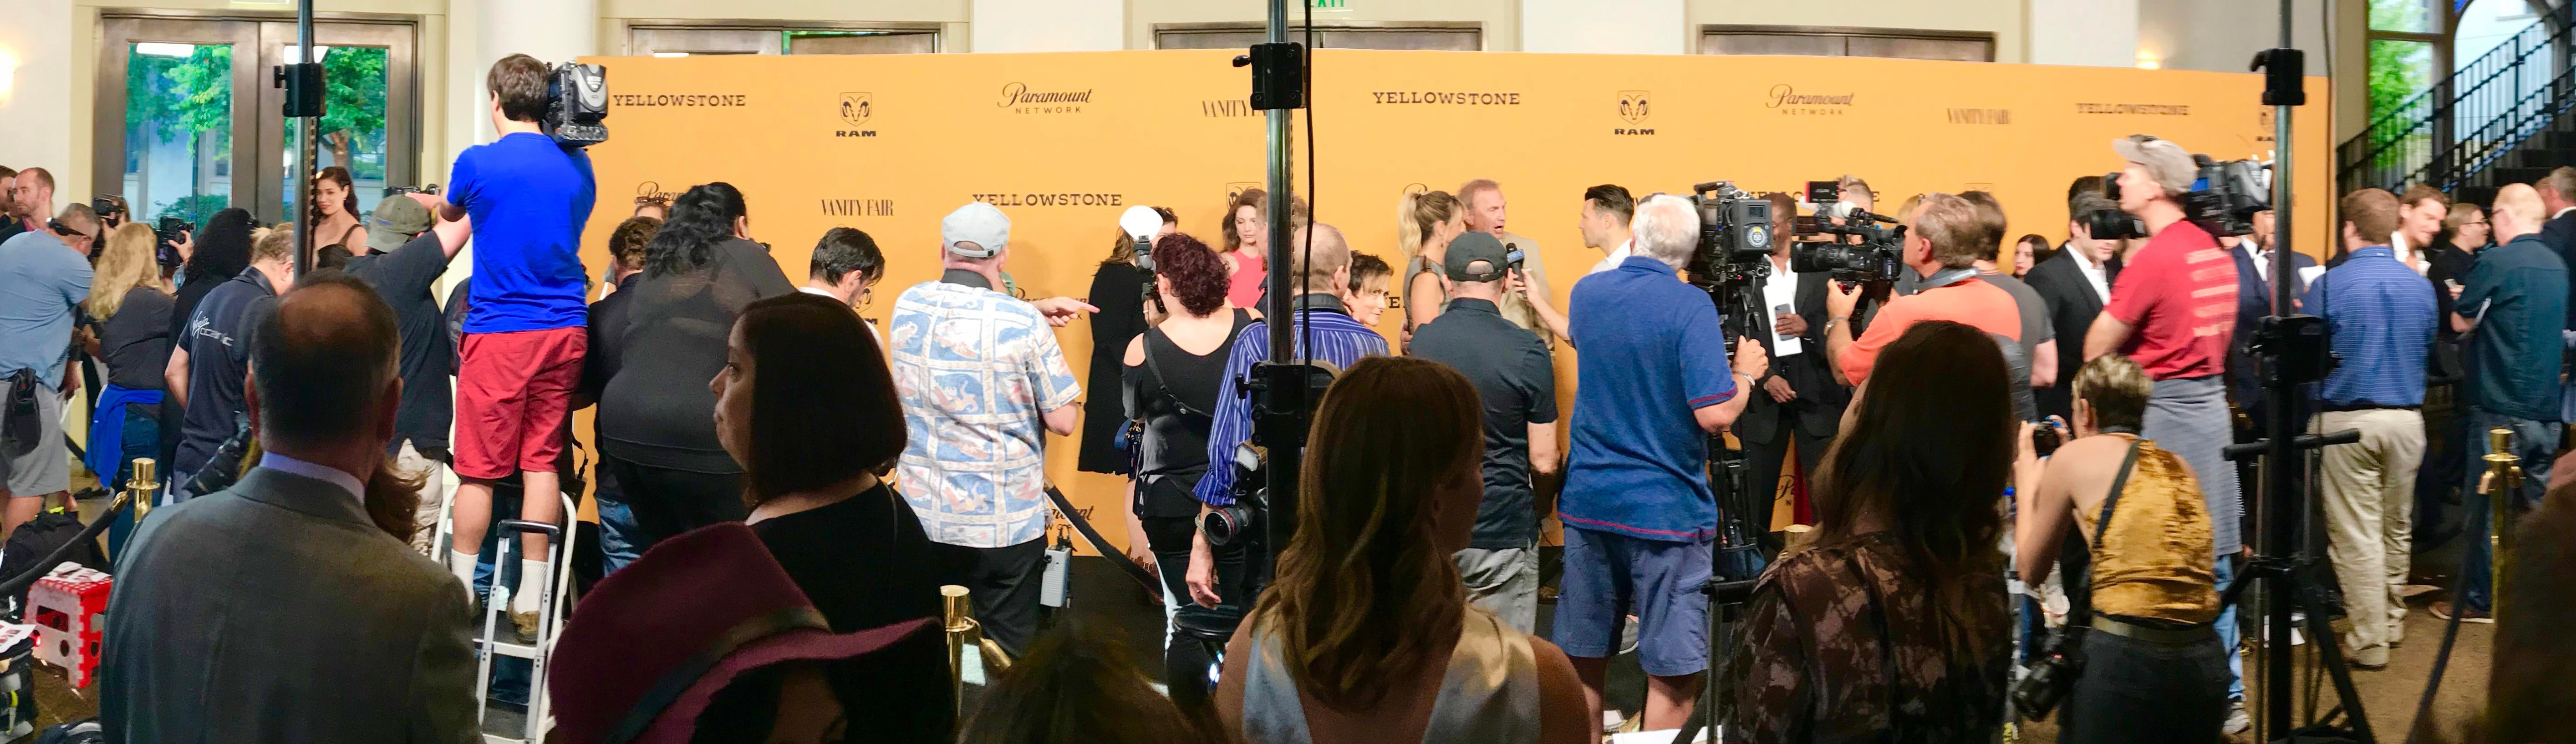 Behind the Red Carpet at the Yellowstone Premiere, Red Carpet Hollywood: Celebrity Fashion,  Red Carpet Dresses,  Red Carpet Hairstyle,  Red Carpet Pictures,  Beautiful Celebs Pics,  Hollywood  